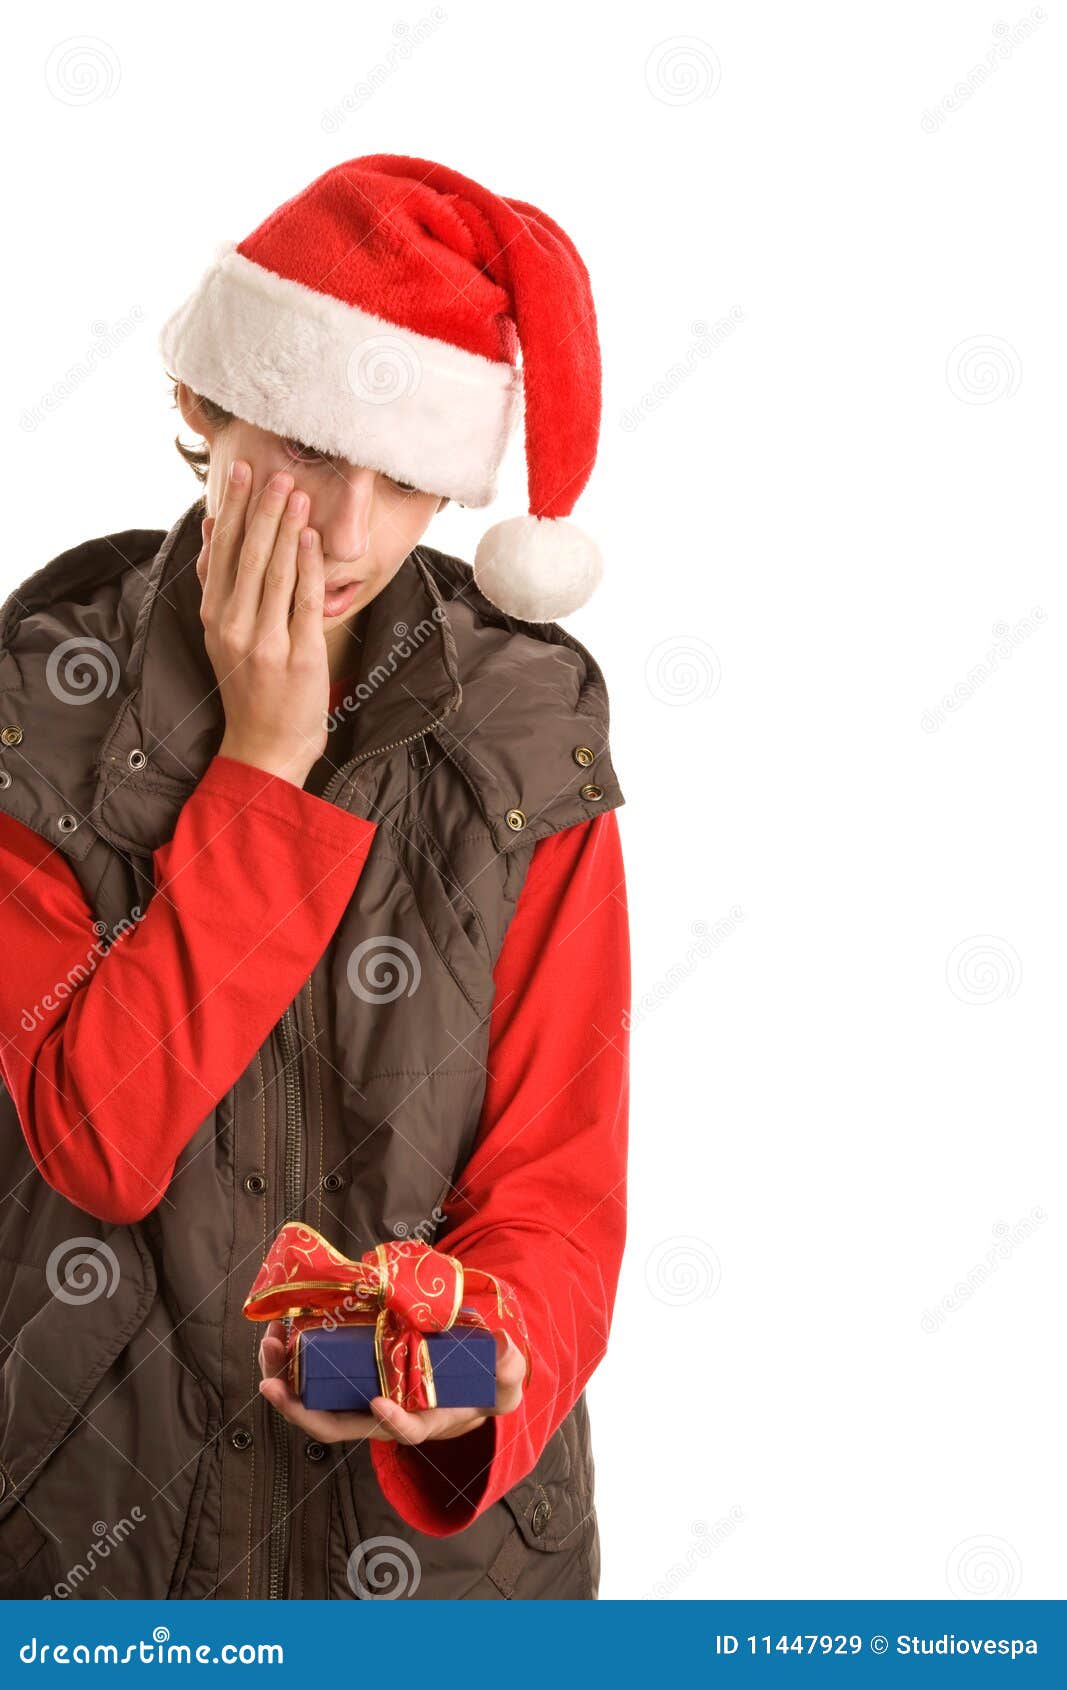 boy with unwanted gift